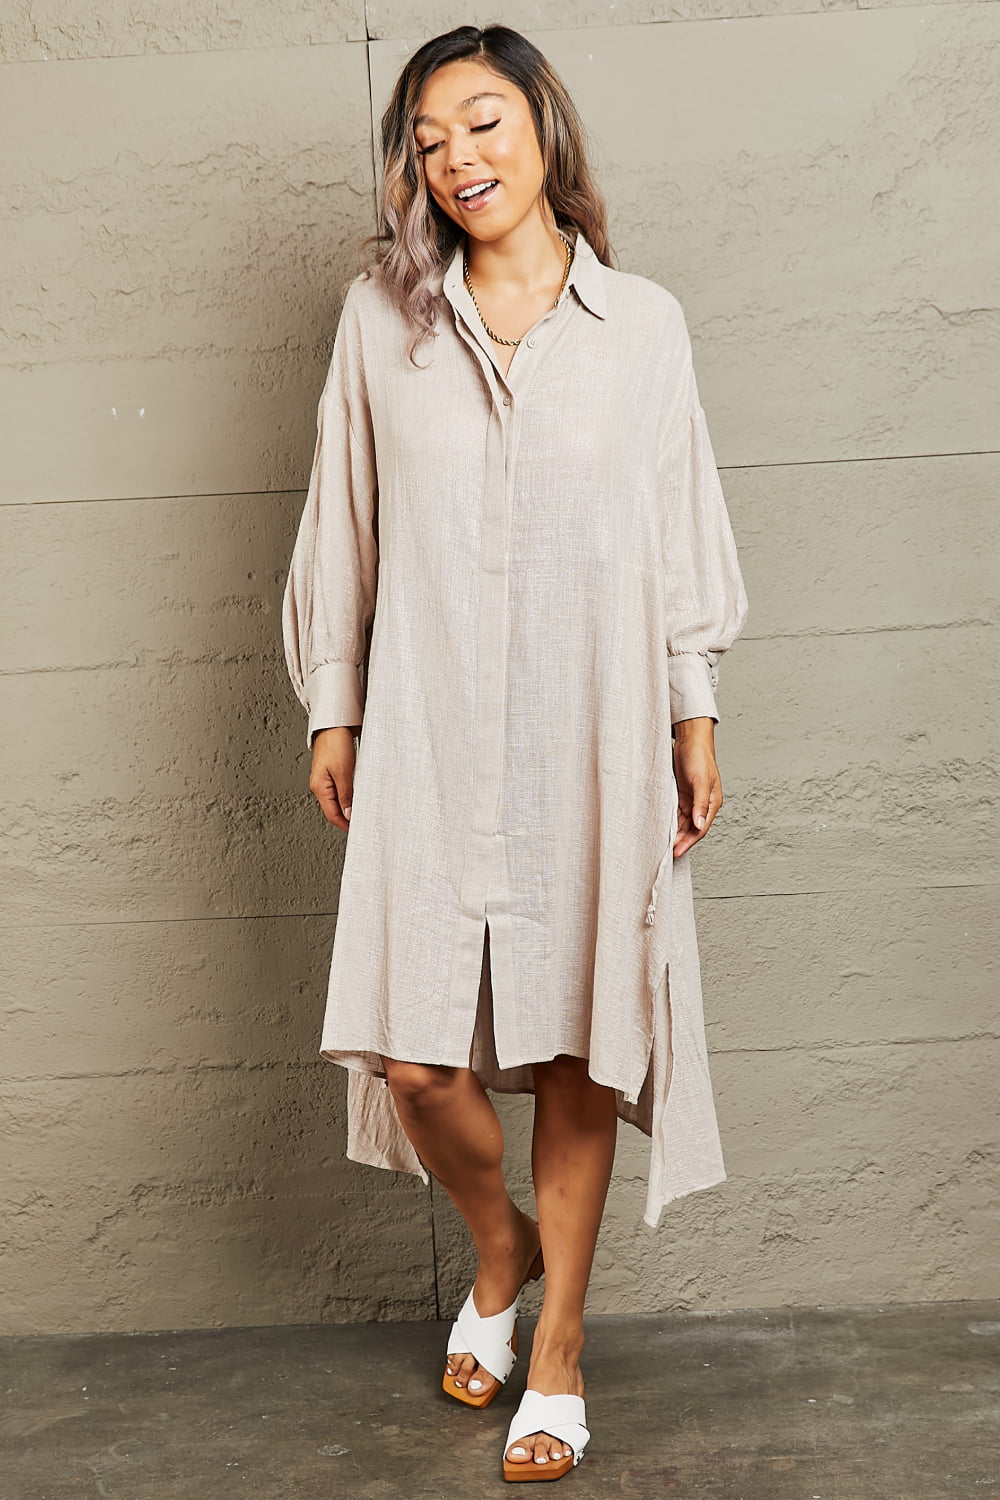 All Occasions Button Down Dress